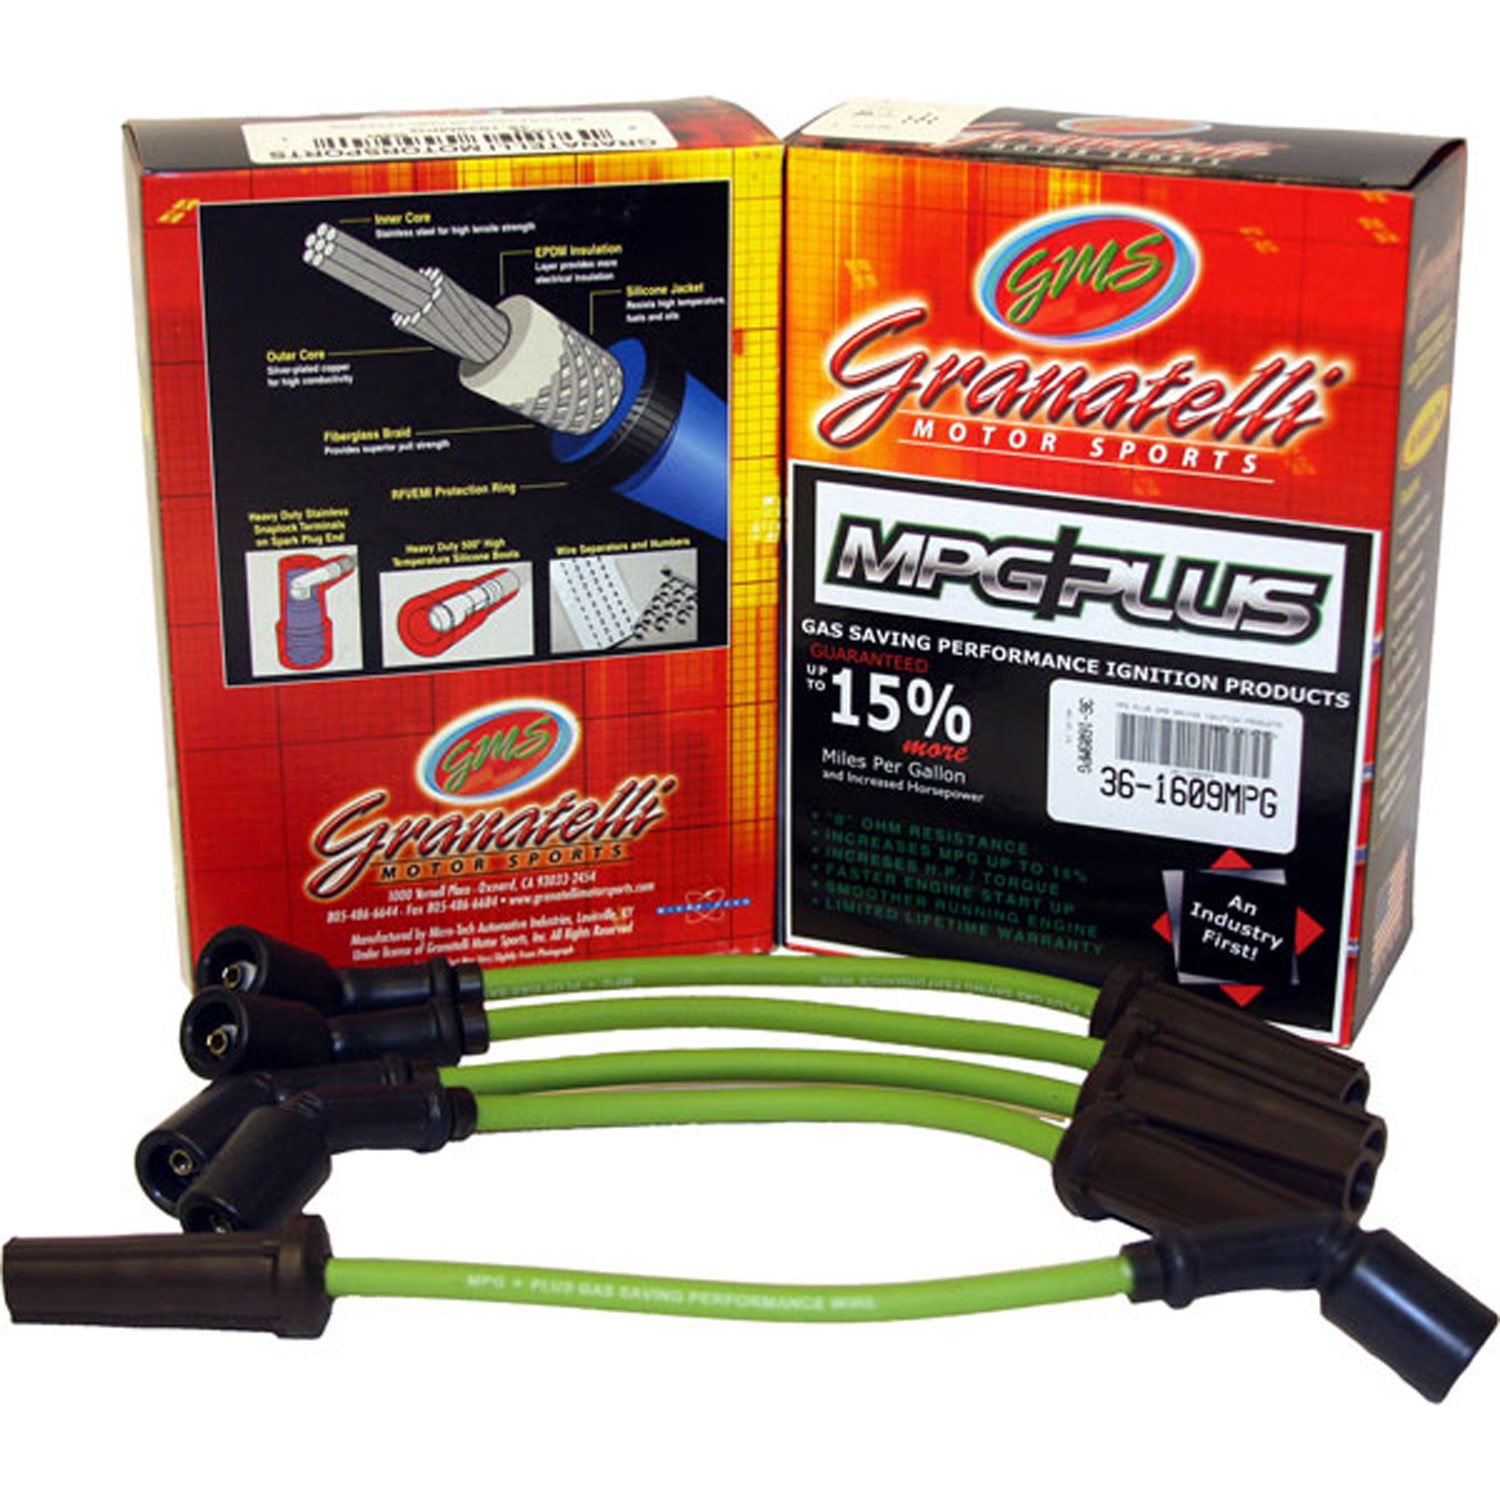 MPG Wires SUBARU FORESTER 4CYL 2.5L 99-04